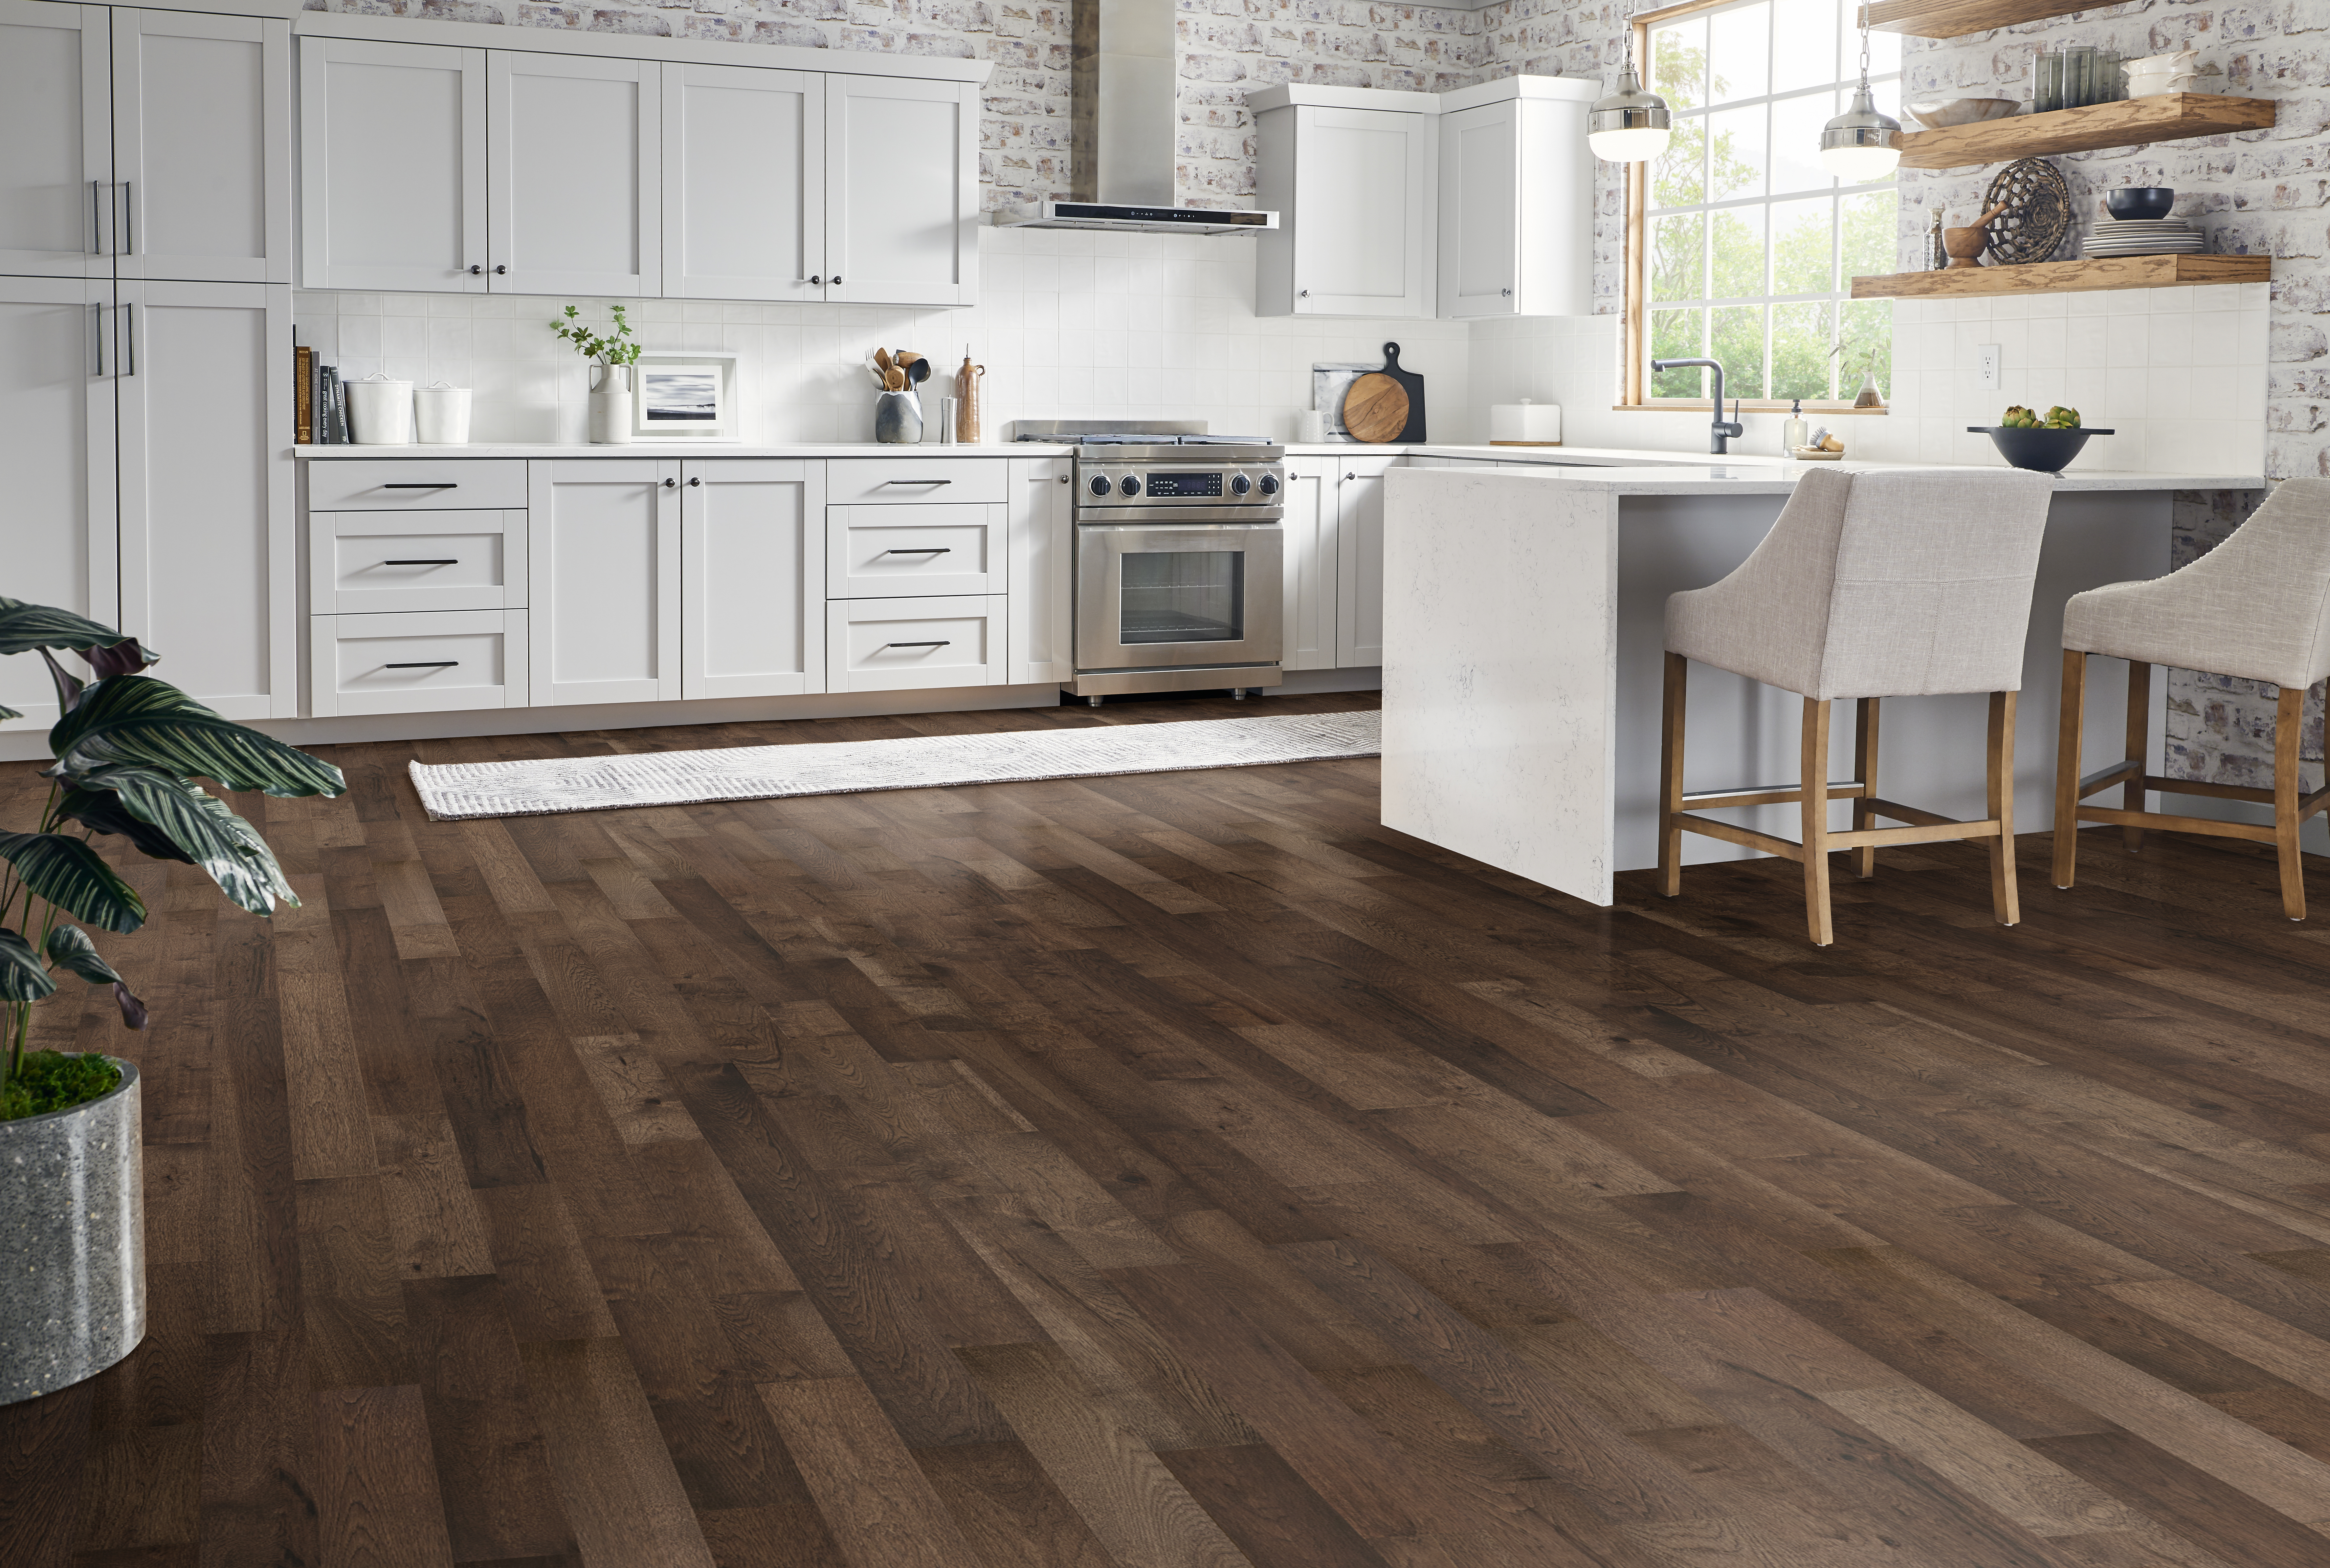 Natural Forest Shaded Brown Solid Hardwood NFSH240S